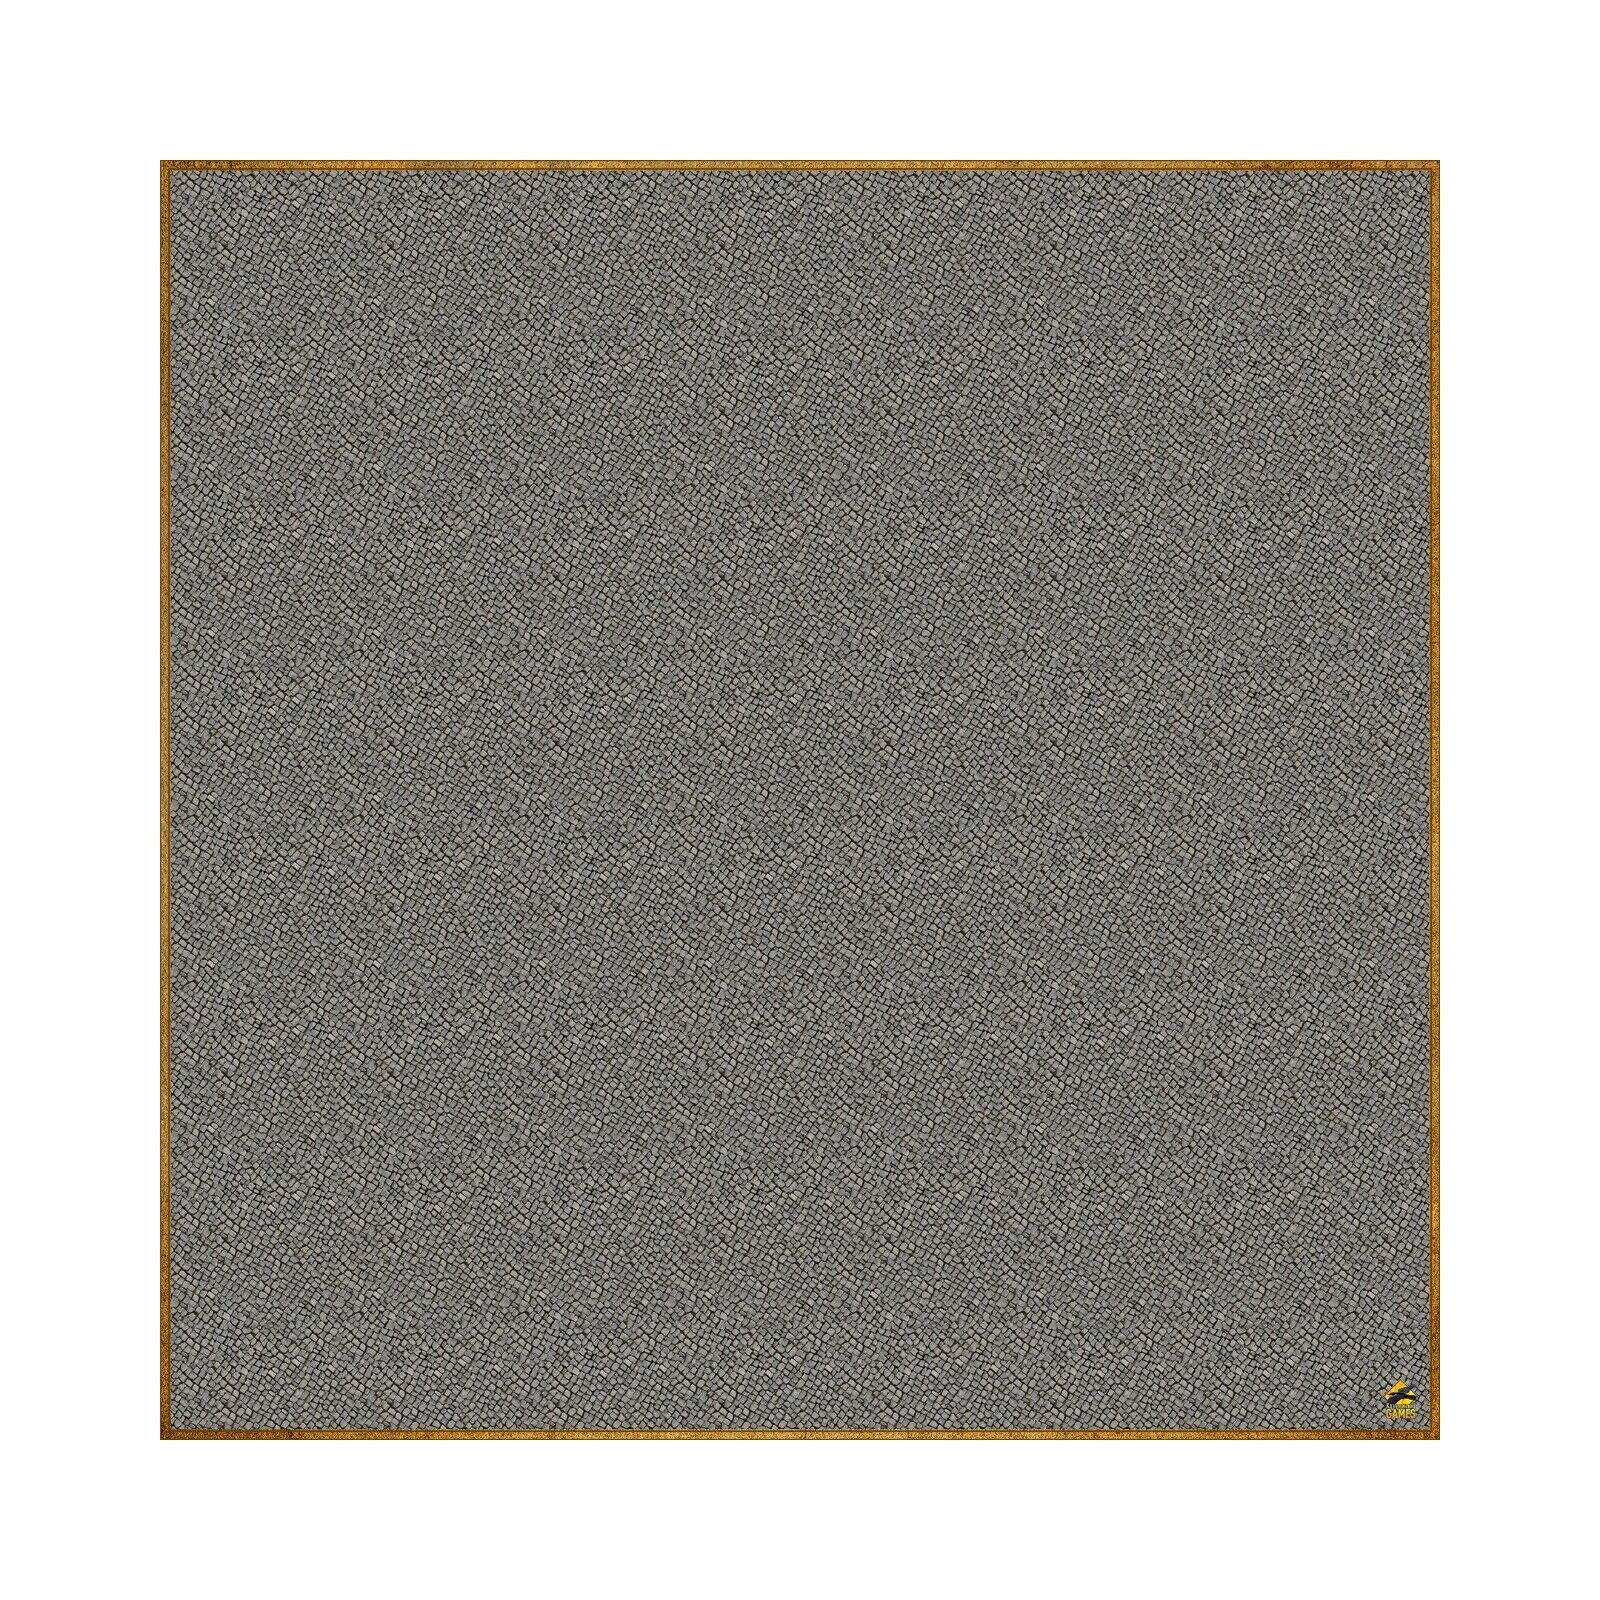 City Cobblestone - 36" x 36" Battle Mat for Table Top RPGs, Dungeons and Dragons, Pathfinder Etc.